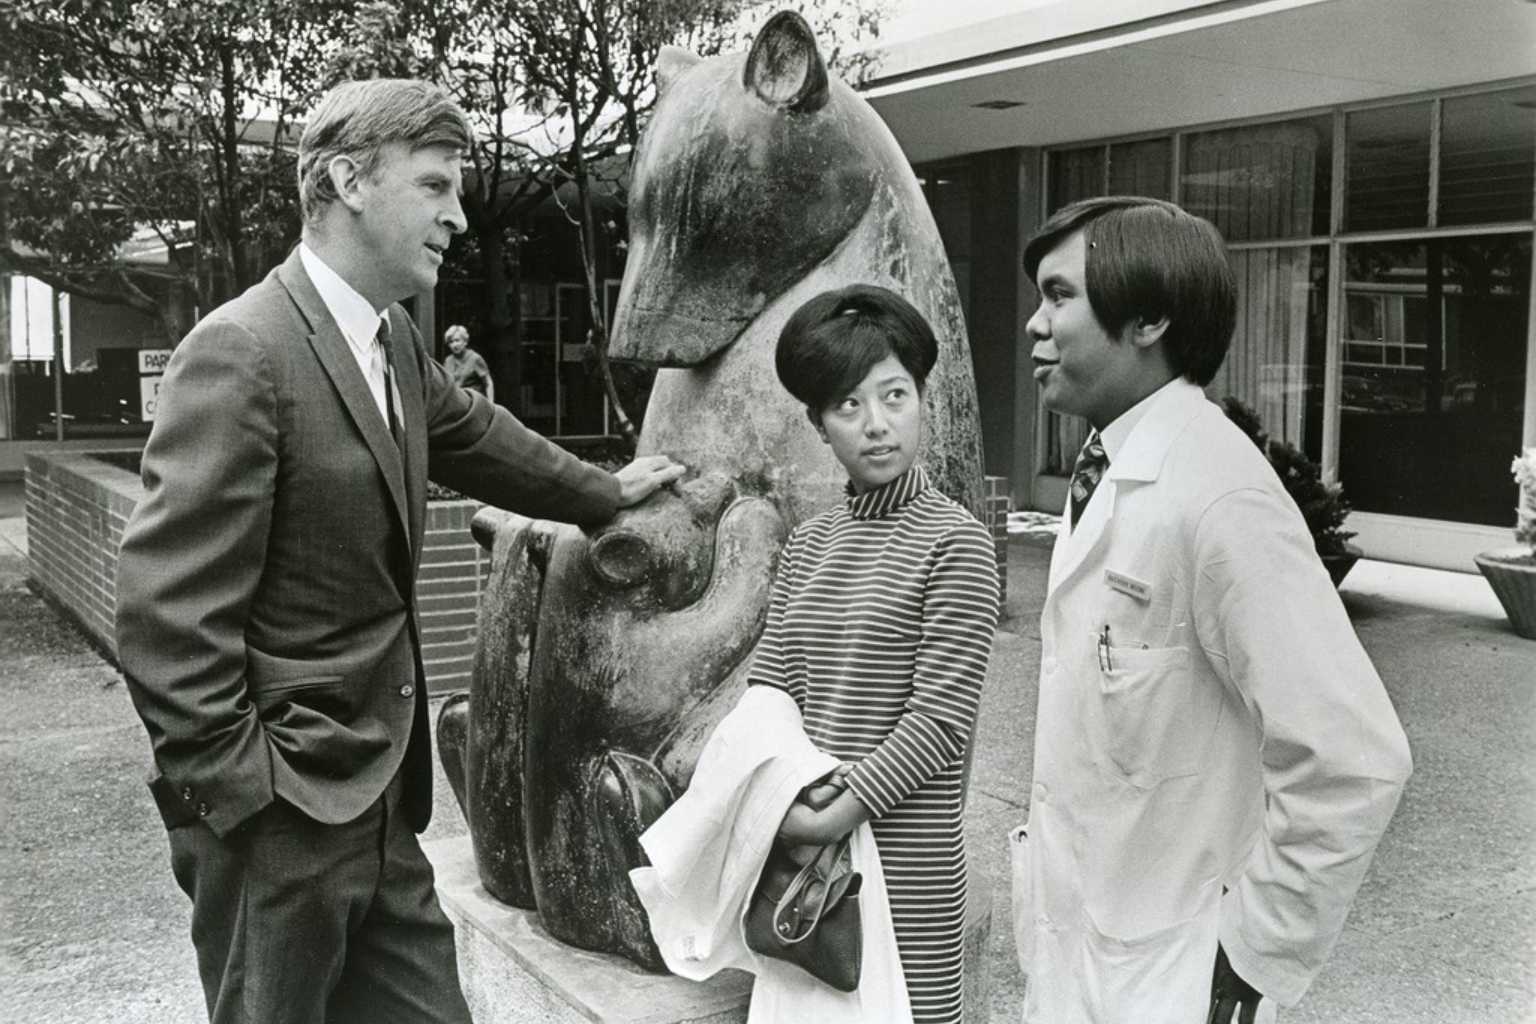  UCSF Chancellor Philip Lee with students in white lab coats in front of Beniamino Bufano’s Bear and Cubs sculpture.